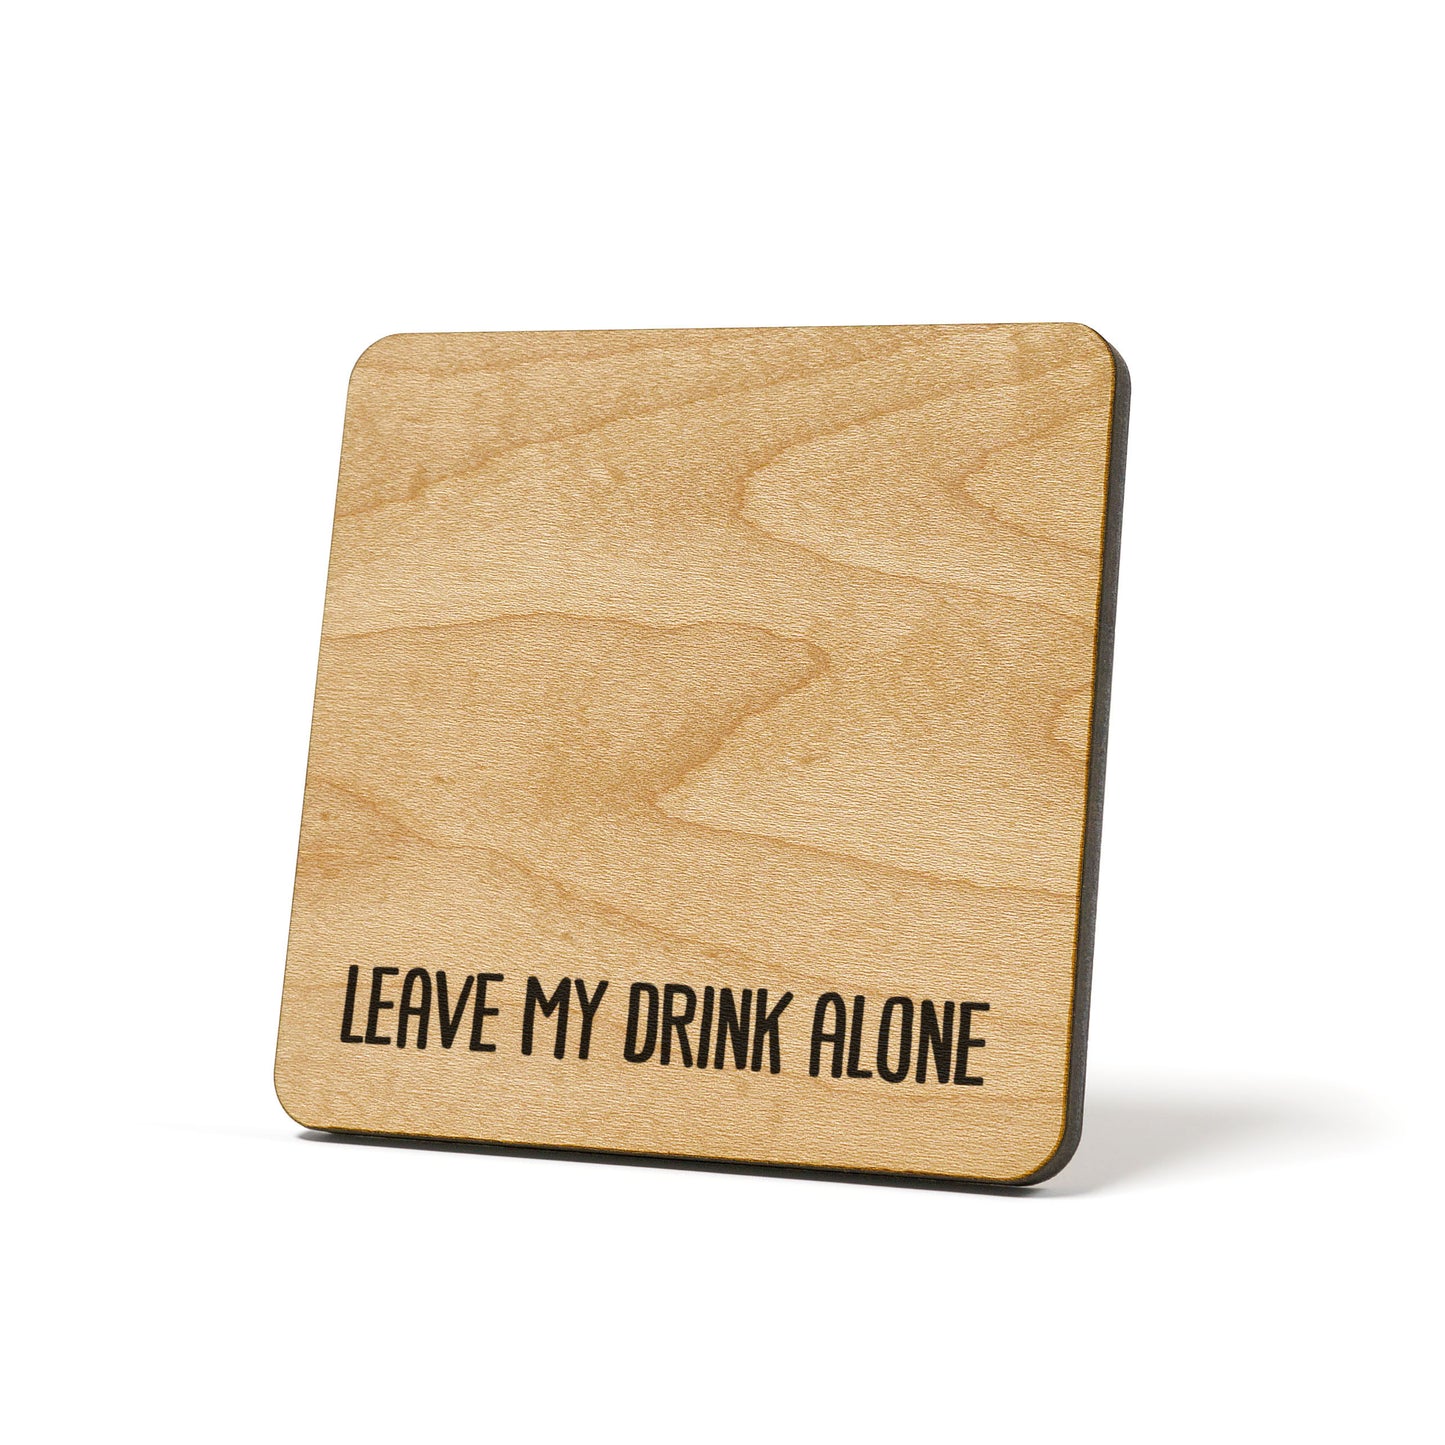 Leave my drink alone Coaster